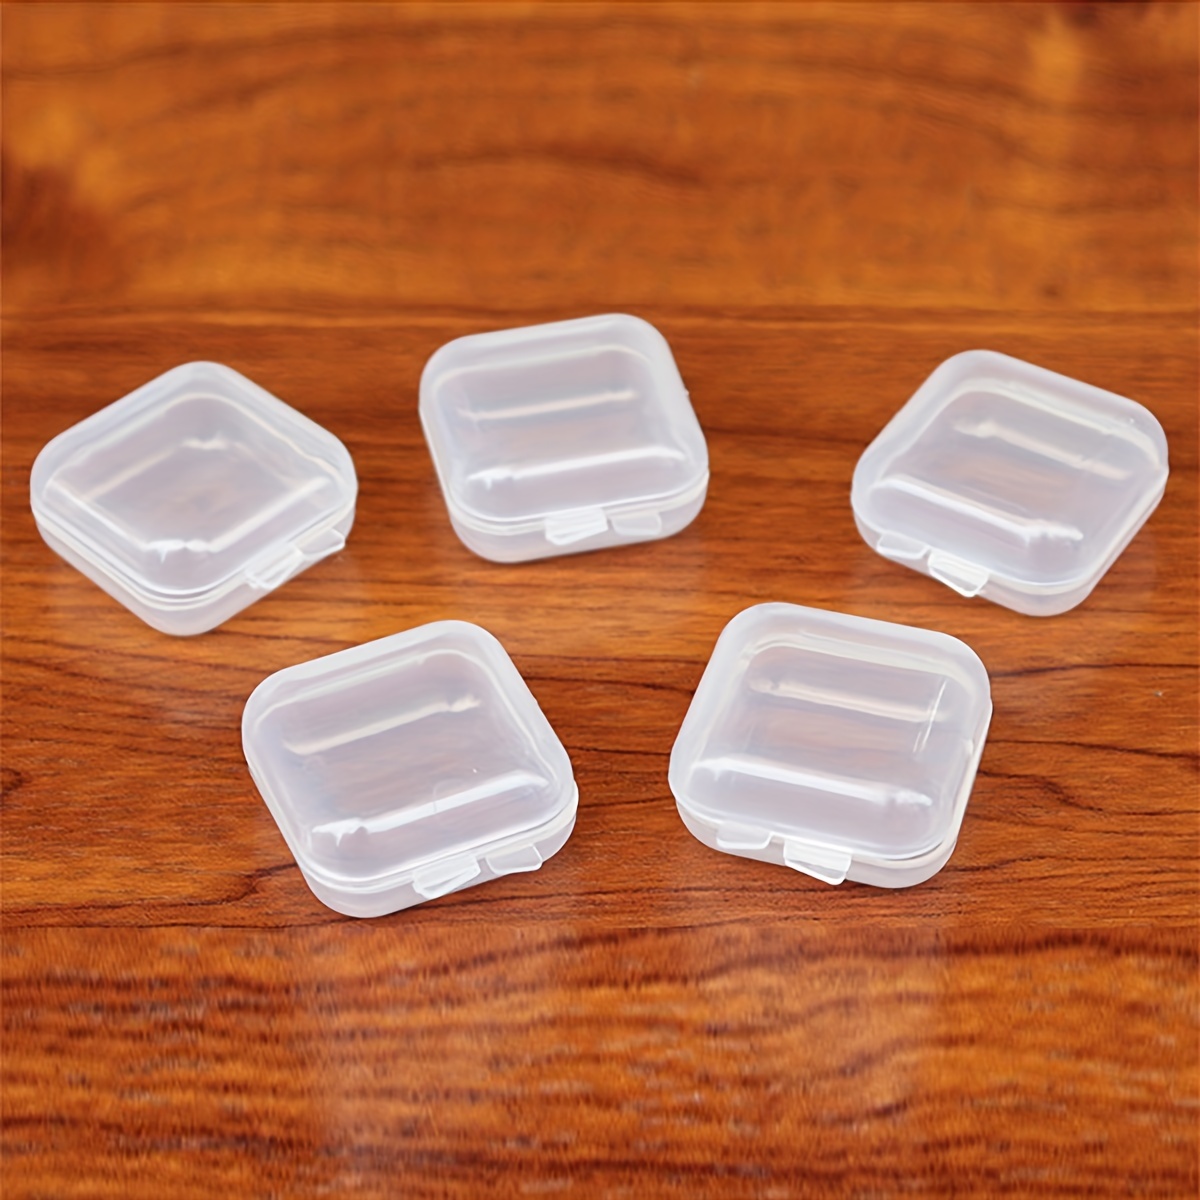 1pc High Transparent Storage Box, PP Plastic Small Box, Thickened Rectangle  Covered Jewelry Earrings Fishing Box, Tackle Accessories Product Packaging